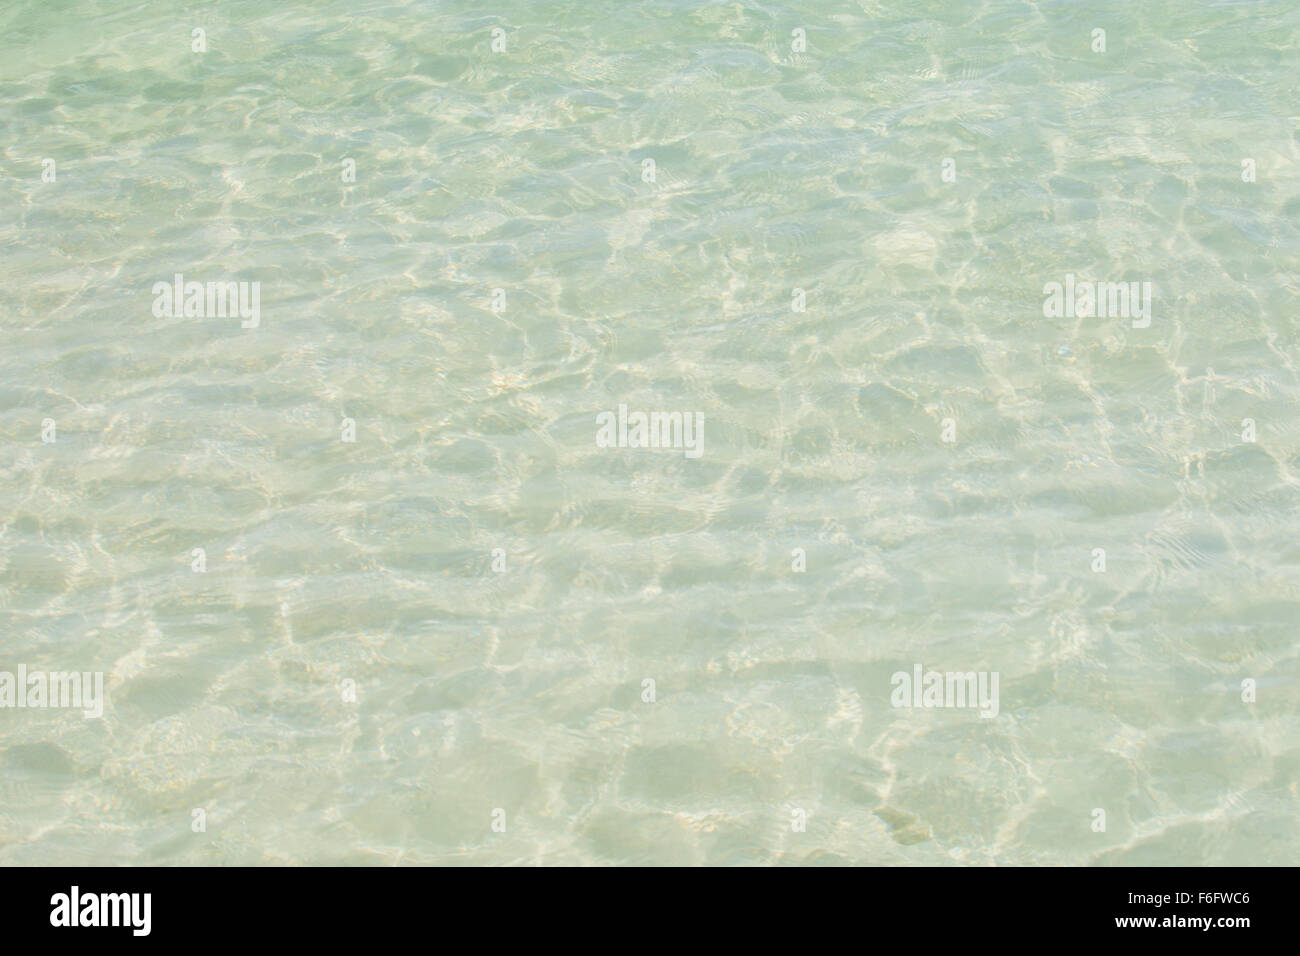 Water textures in the sea of thailand Stock Photo